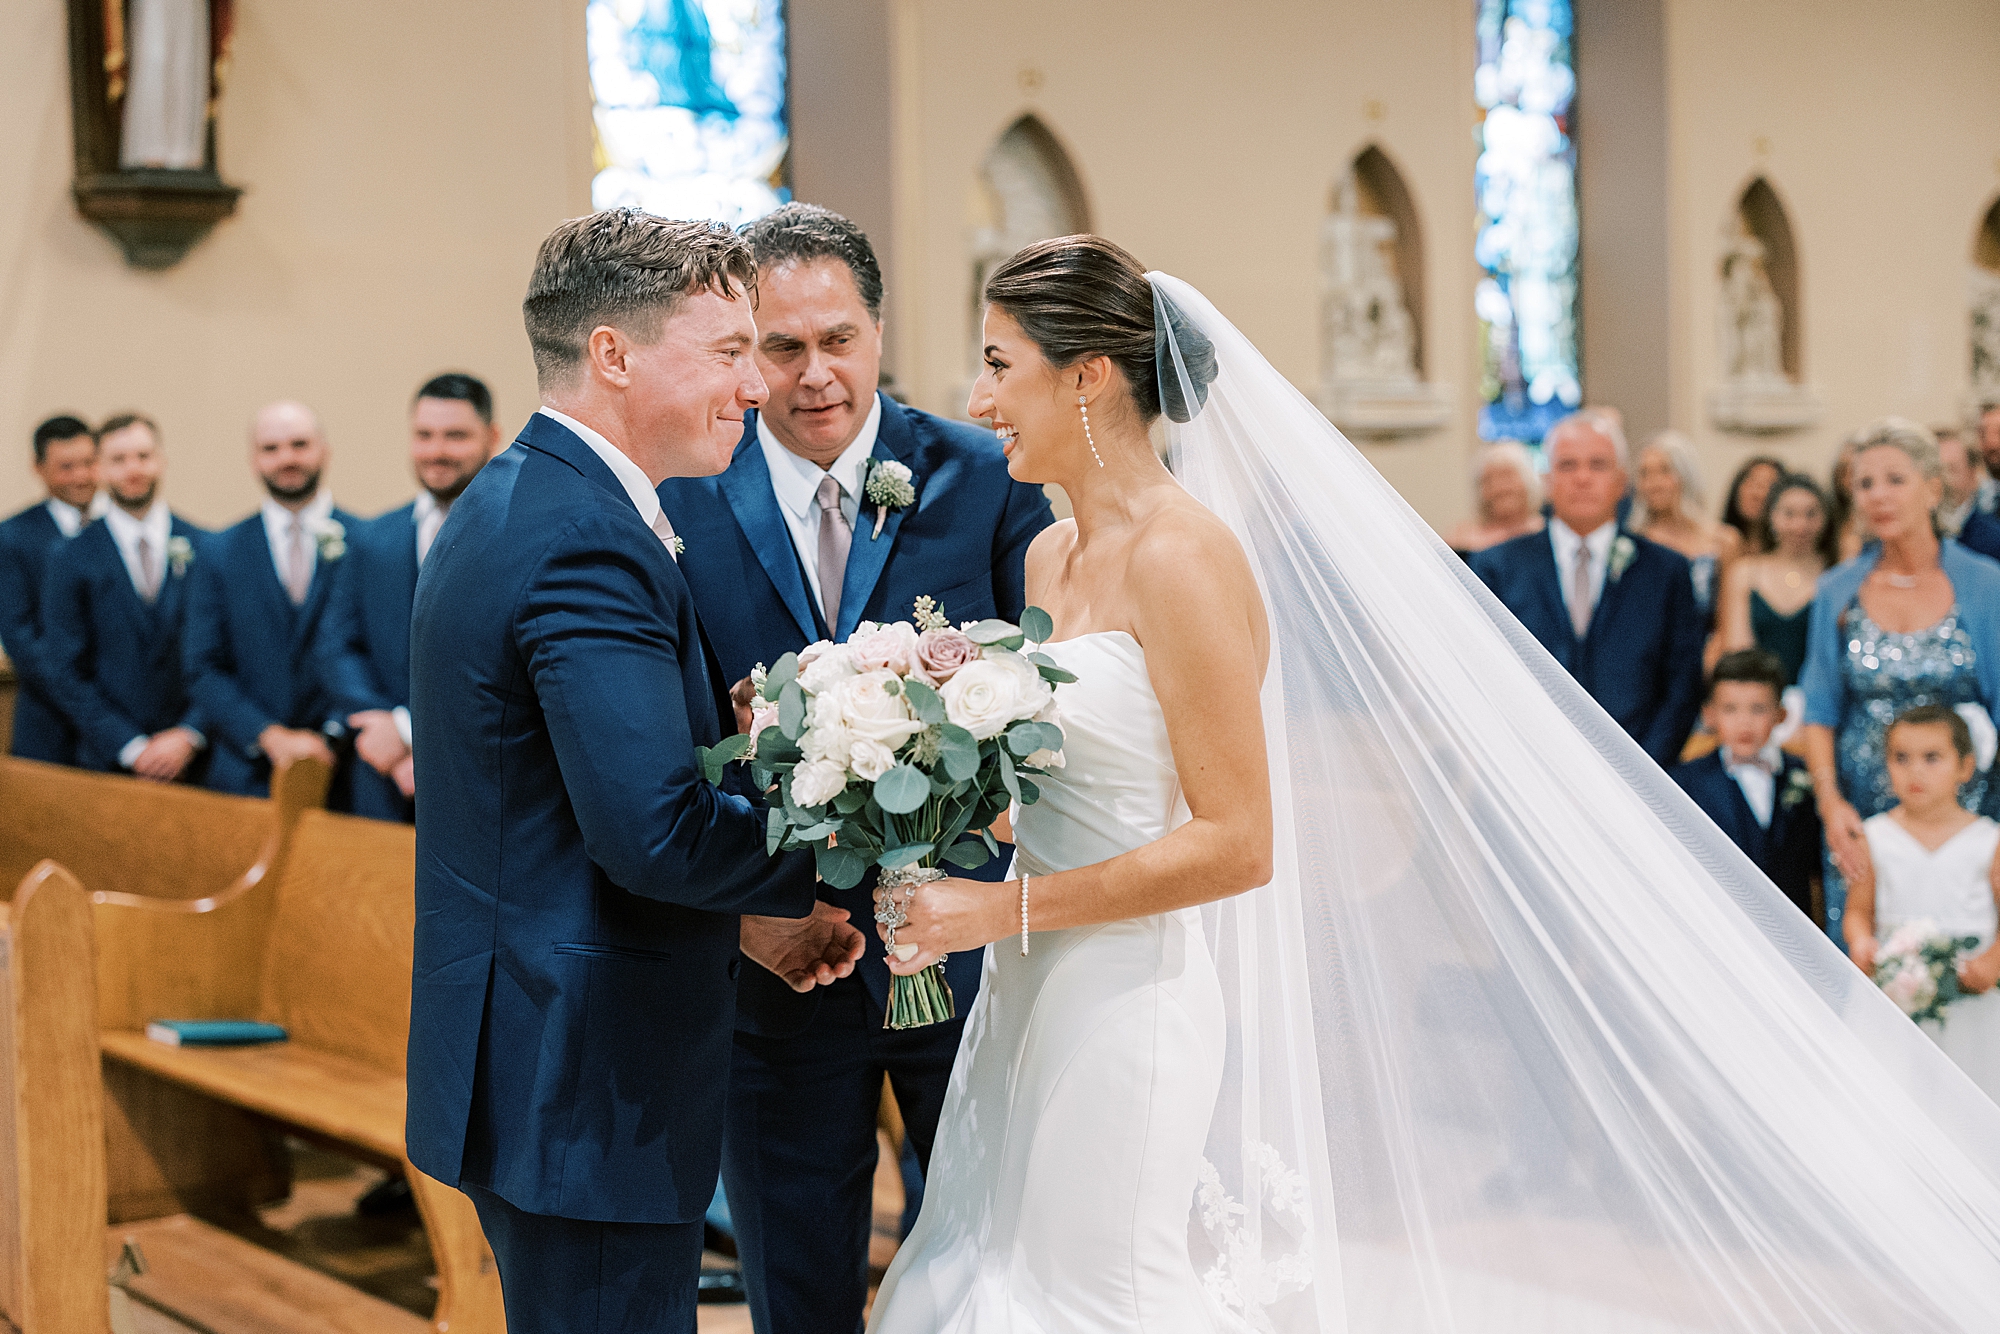 father gives away bride during traditional wedding ceremony at Philadelphia PA church